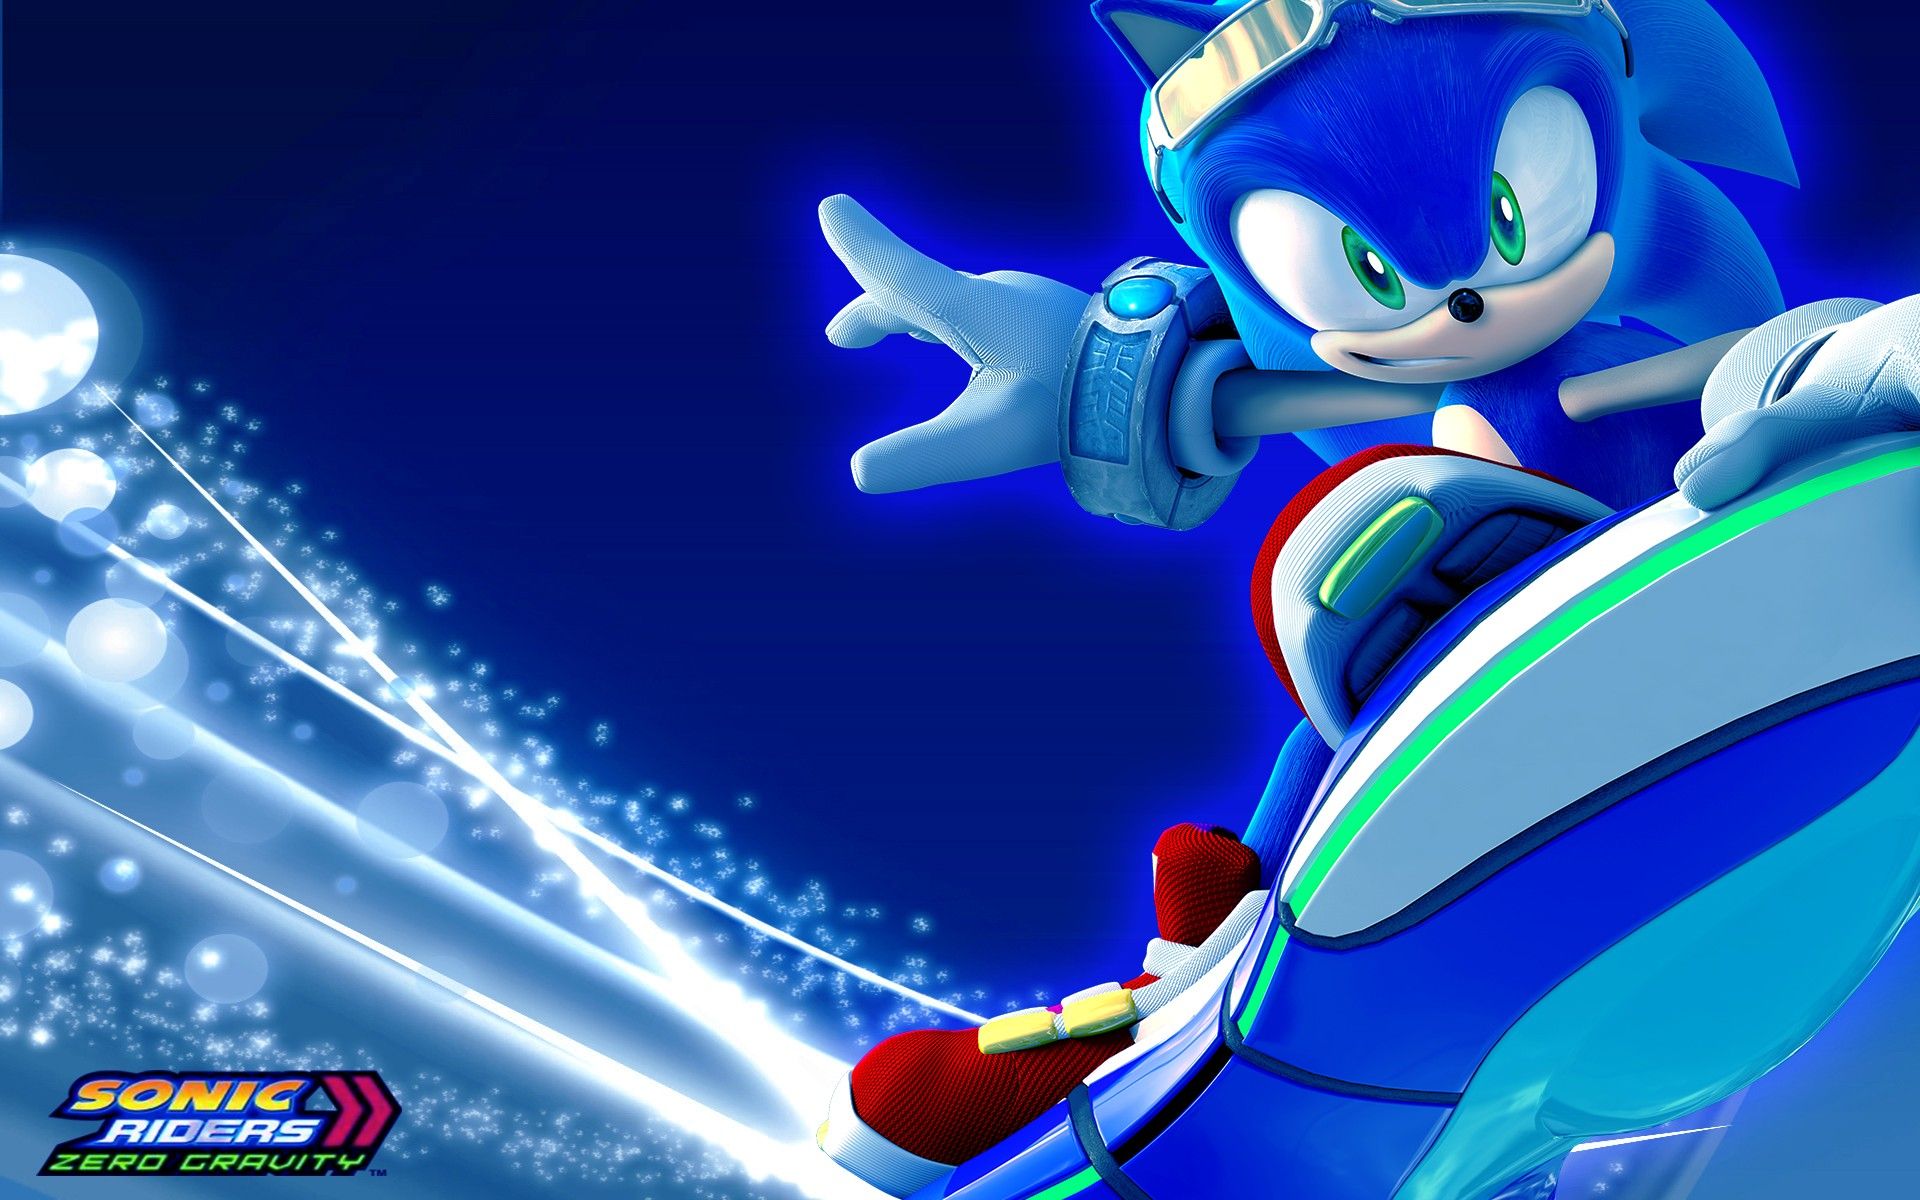 A blue hedgehog wearing a red and white jacket and green gloves is on a snowboard. - Sonic